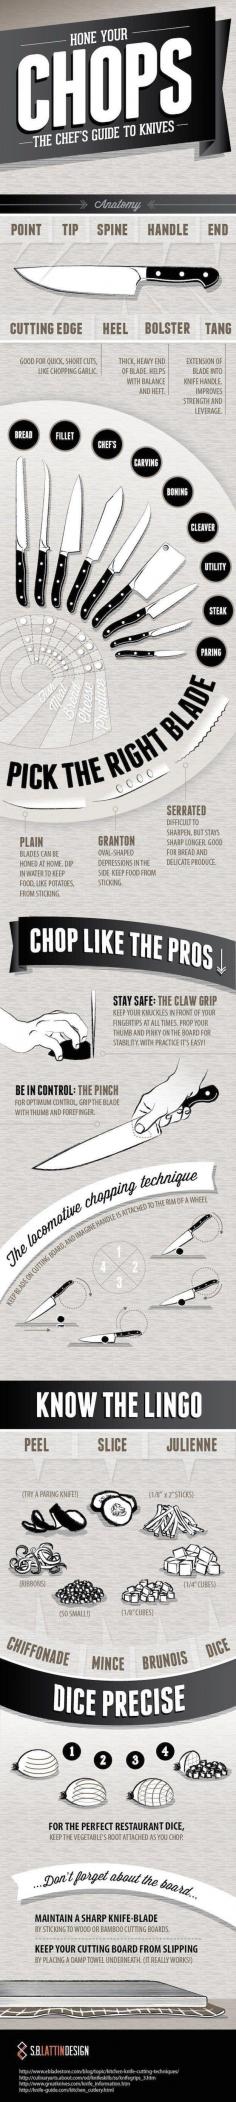 For knife skills. | 27 Diagrams That Will Make You A Better Cook